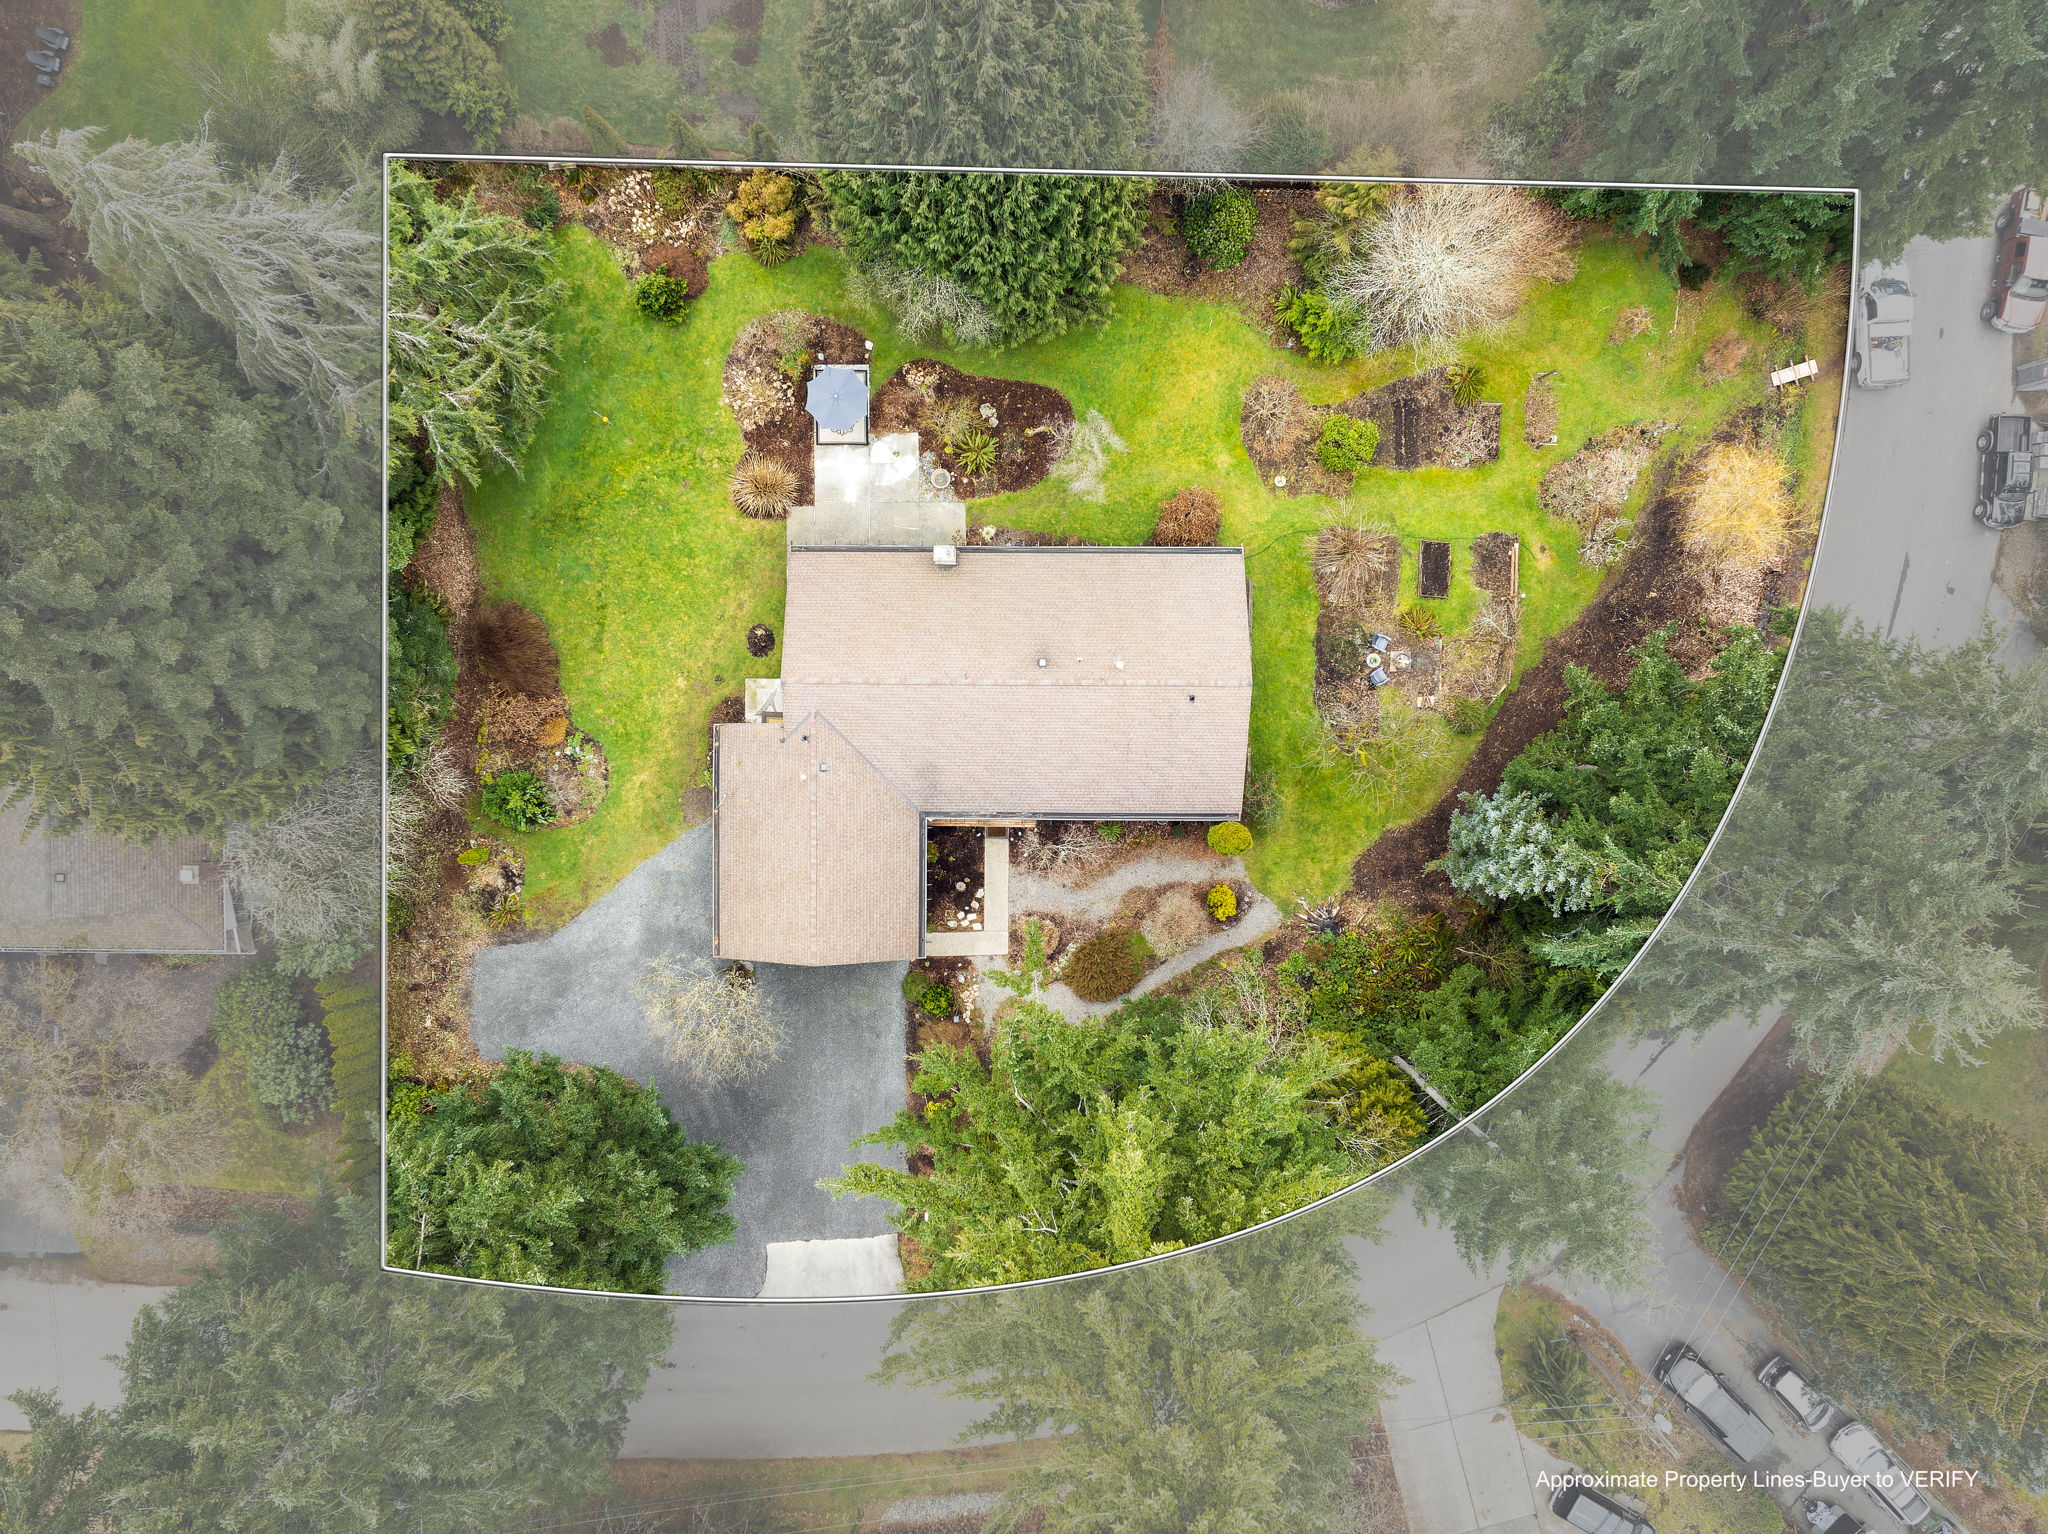 Drone view of this rare corner lot rambler home property in Woodinville!